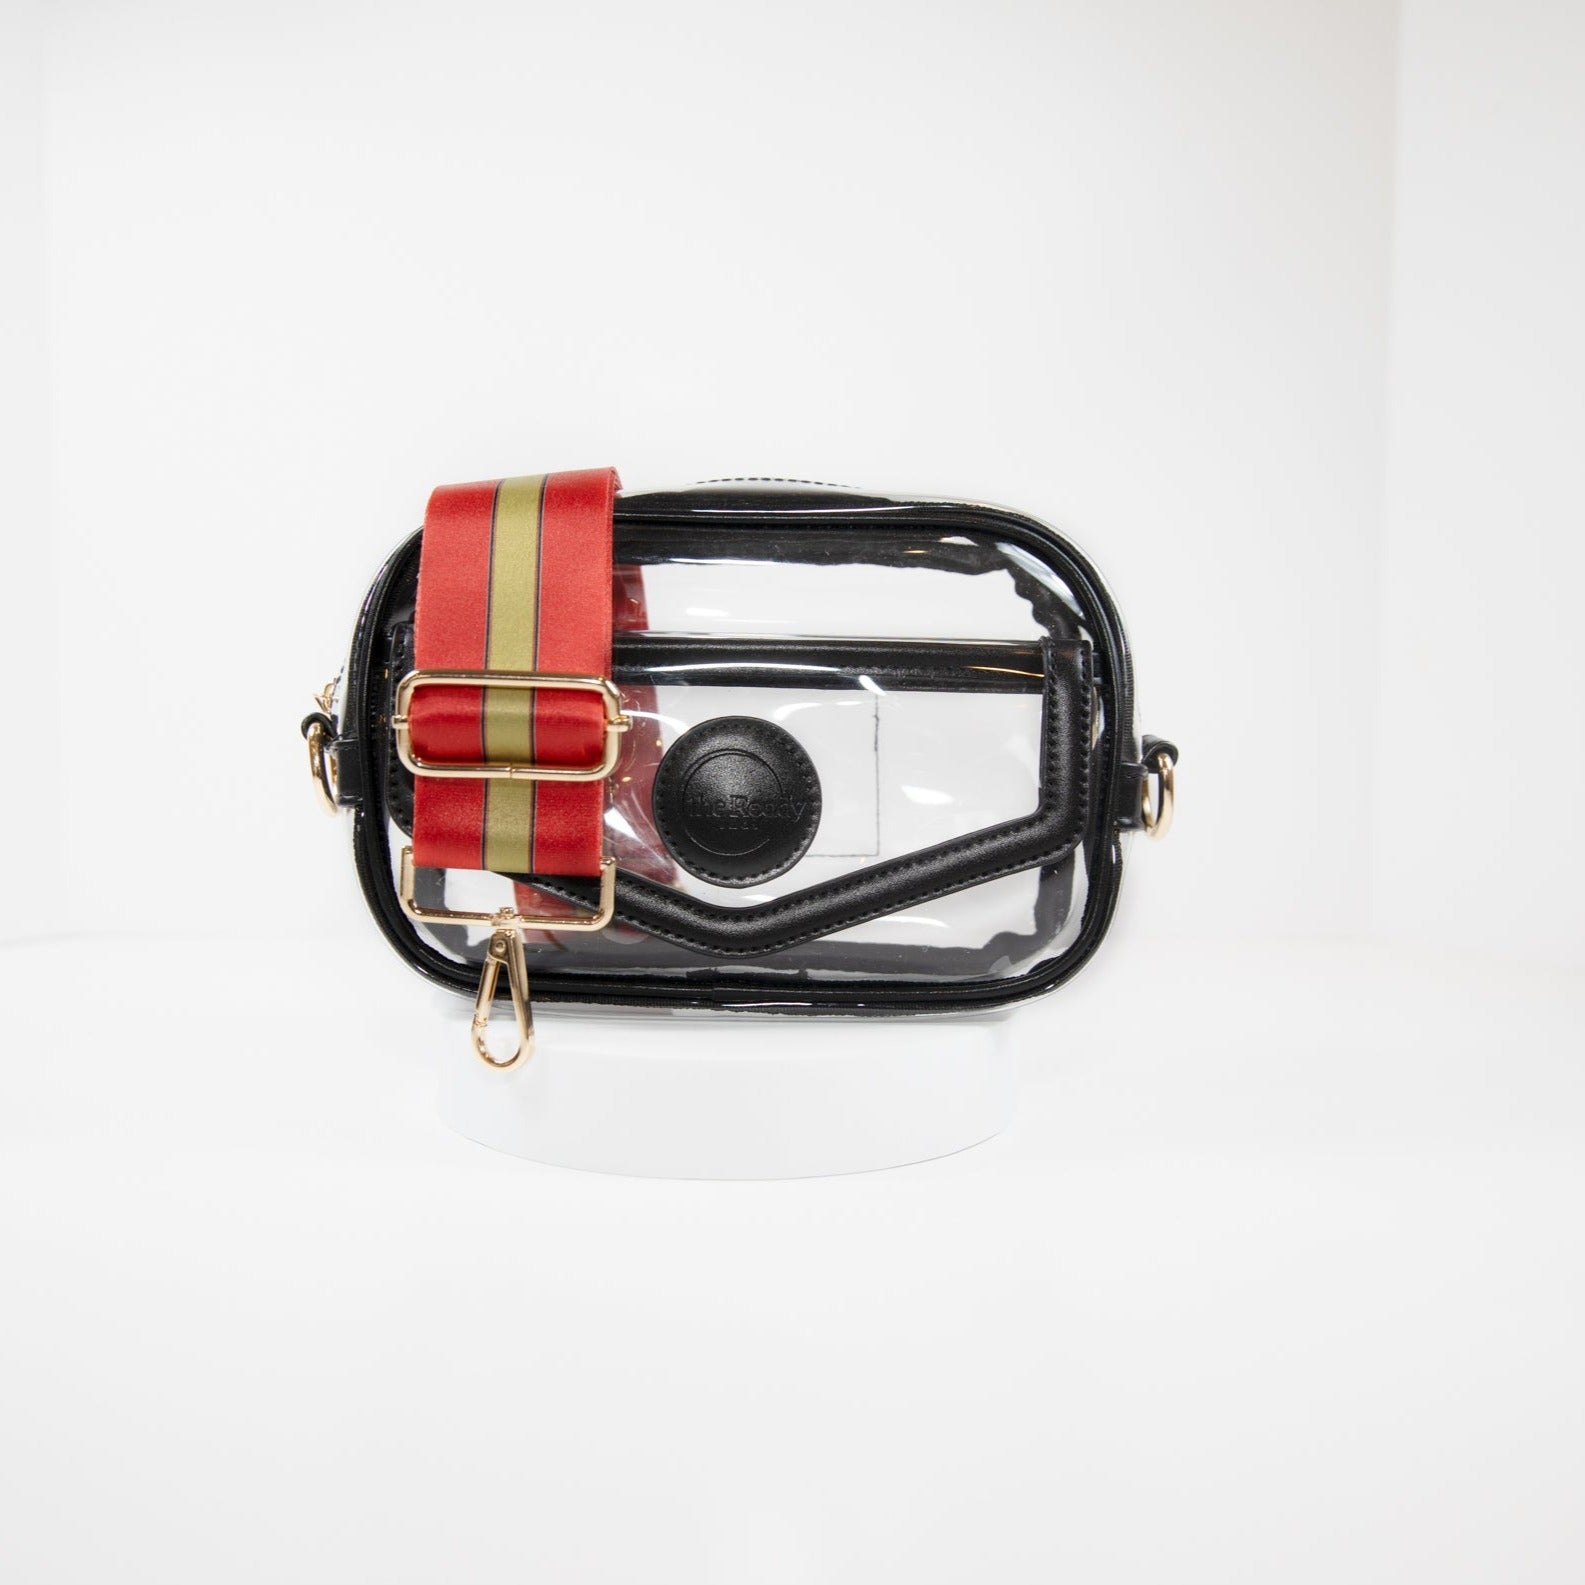 Clear Stadium Bag in black leather trim, front facing, with a strap in San Francisco 49er team colors.